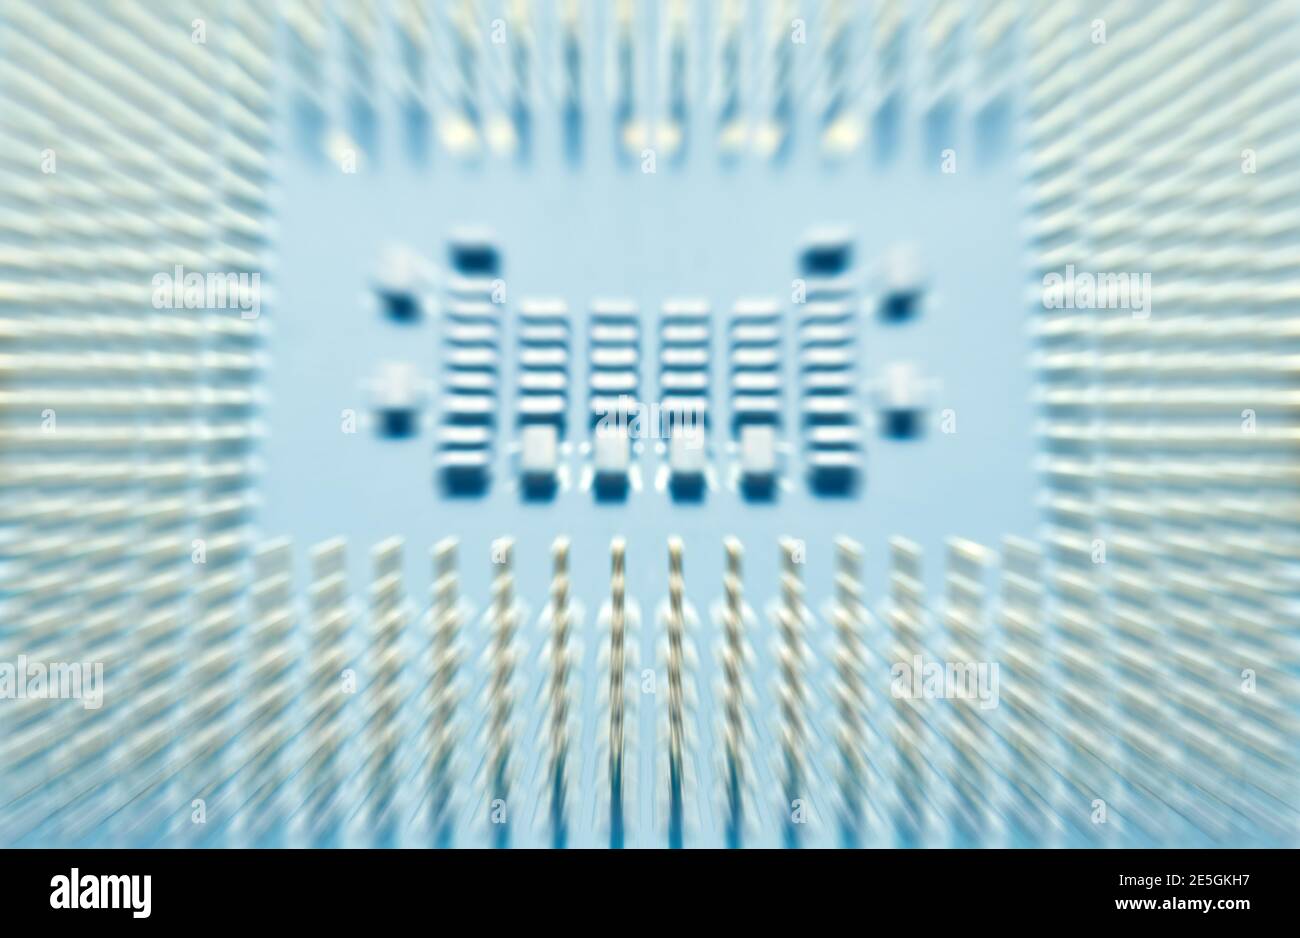 Blurred picture of computer processor close up, abstract high tech background. Stock Photo